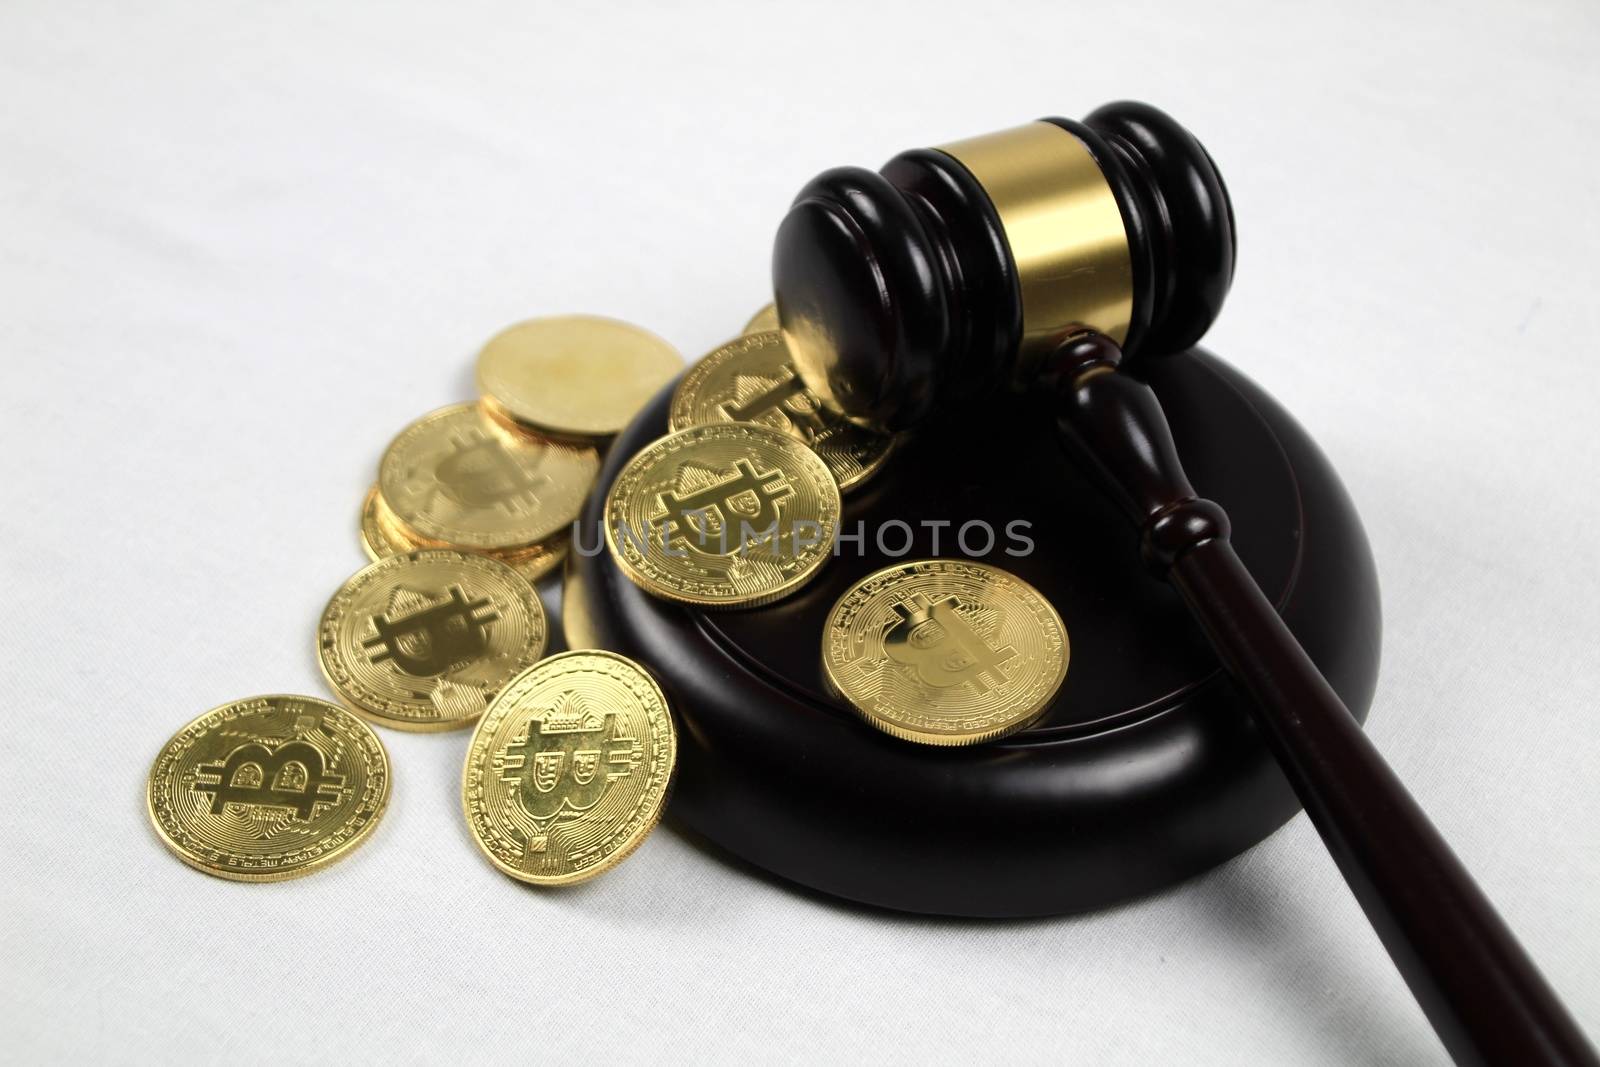 Golden bitcoins and judge gavel by soniabonet